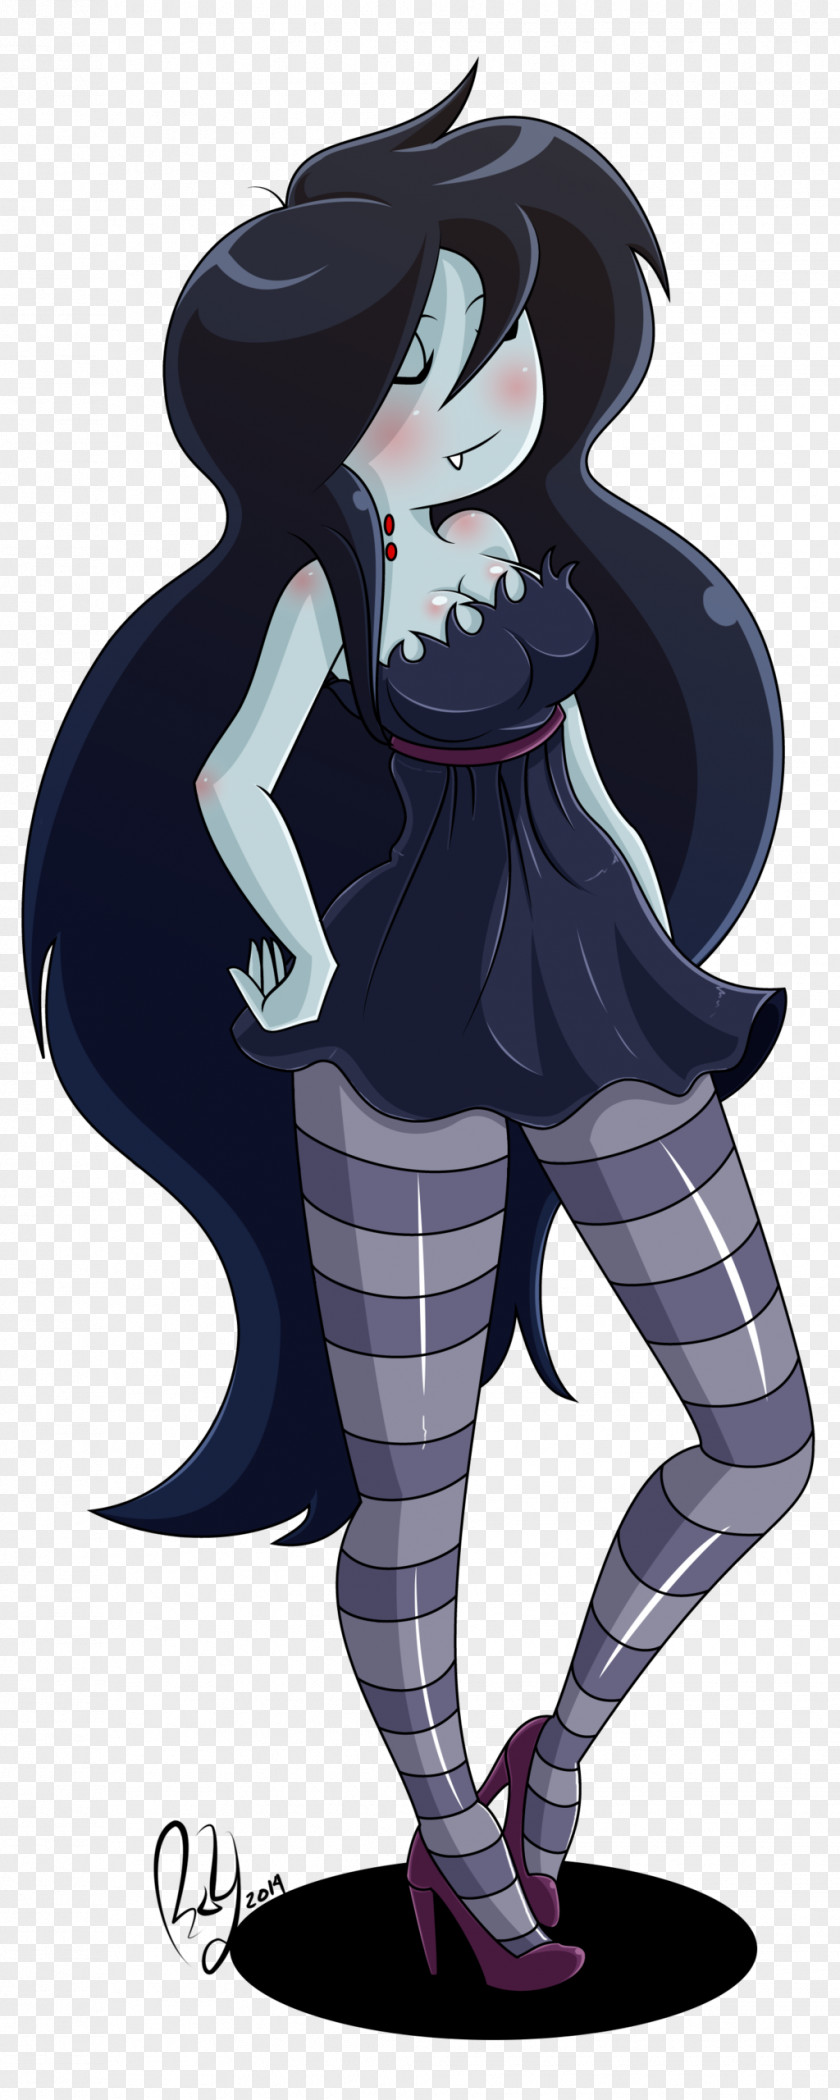 Marceline The Vampire Queen Adventure Time: Explore Dungeon Because I Don't Know! Henchman Cartoon Network DeviantArt PNG